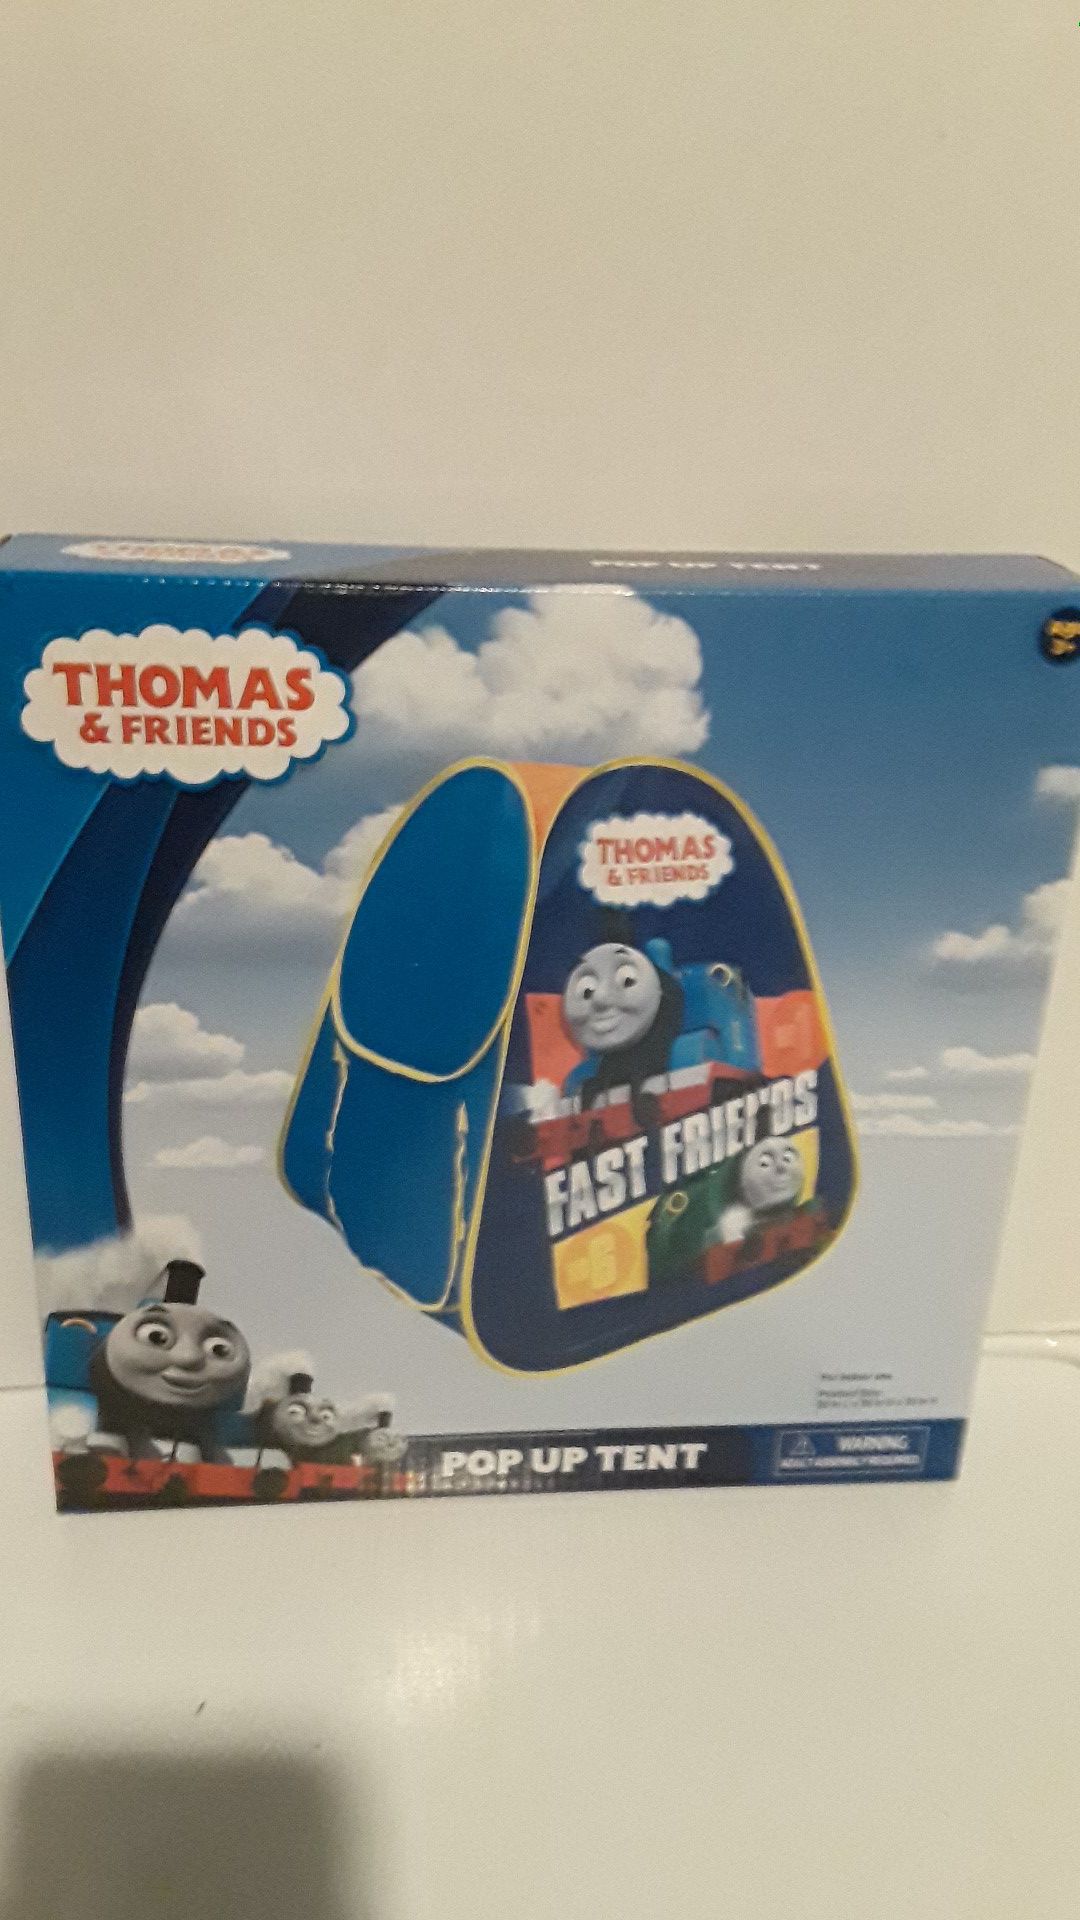 Thomas and friends Pop up tent